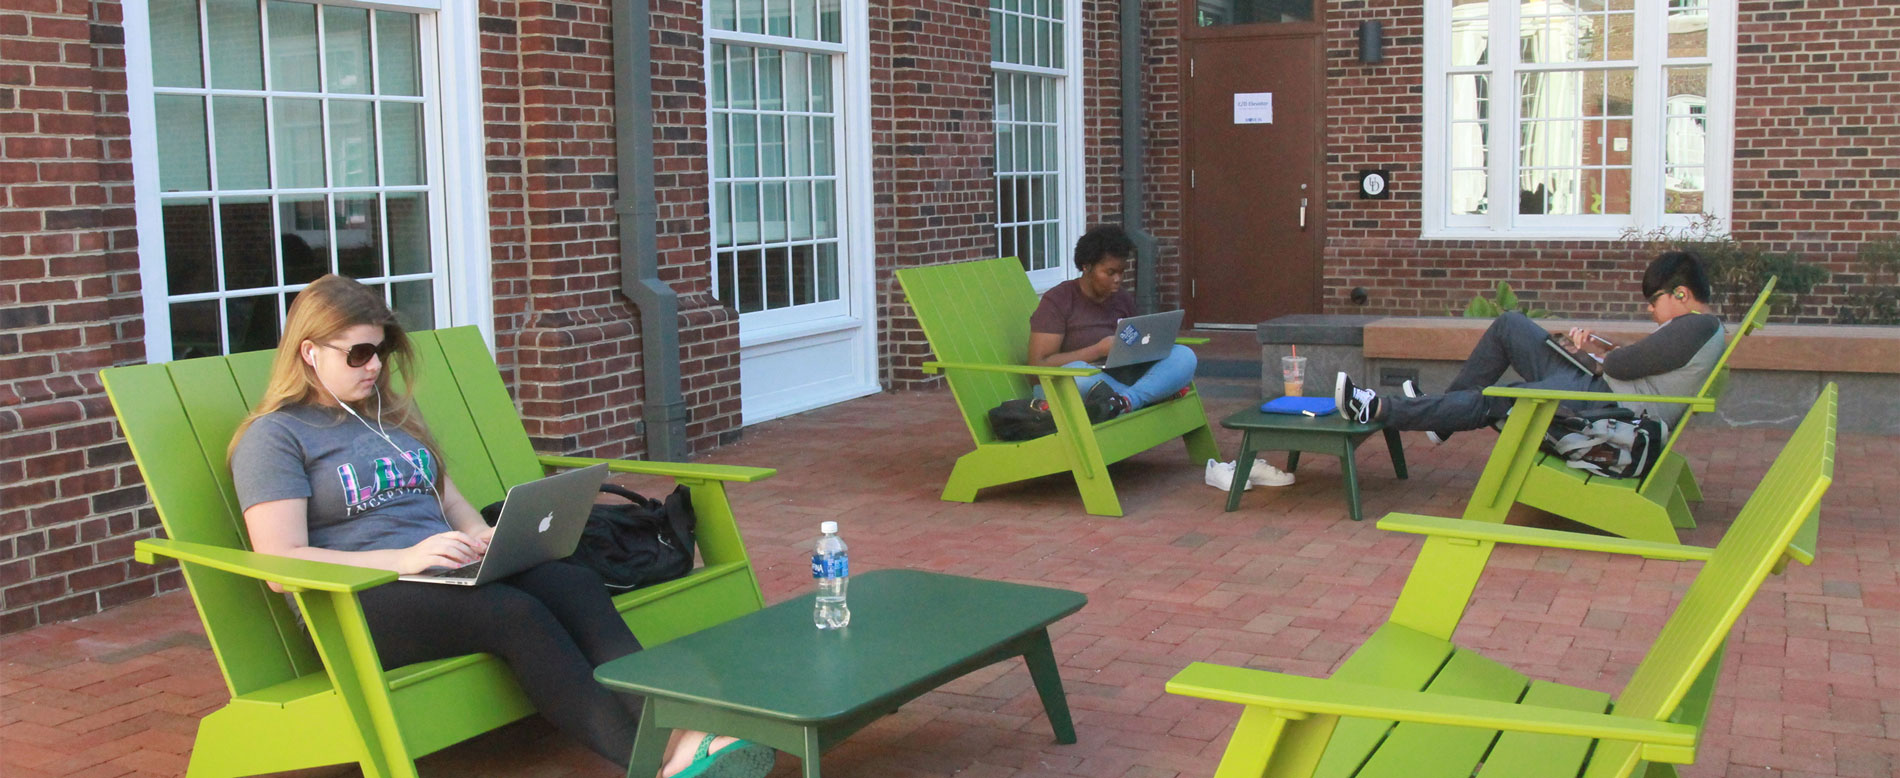 Students working in outdoor space with bright green Adirondack chairs